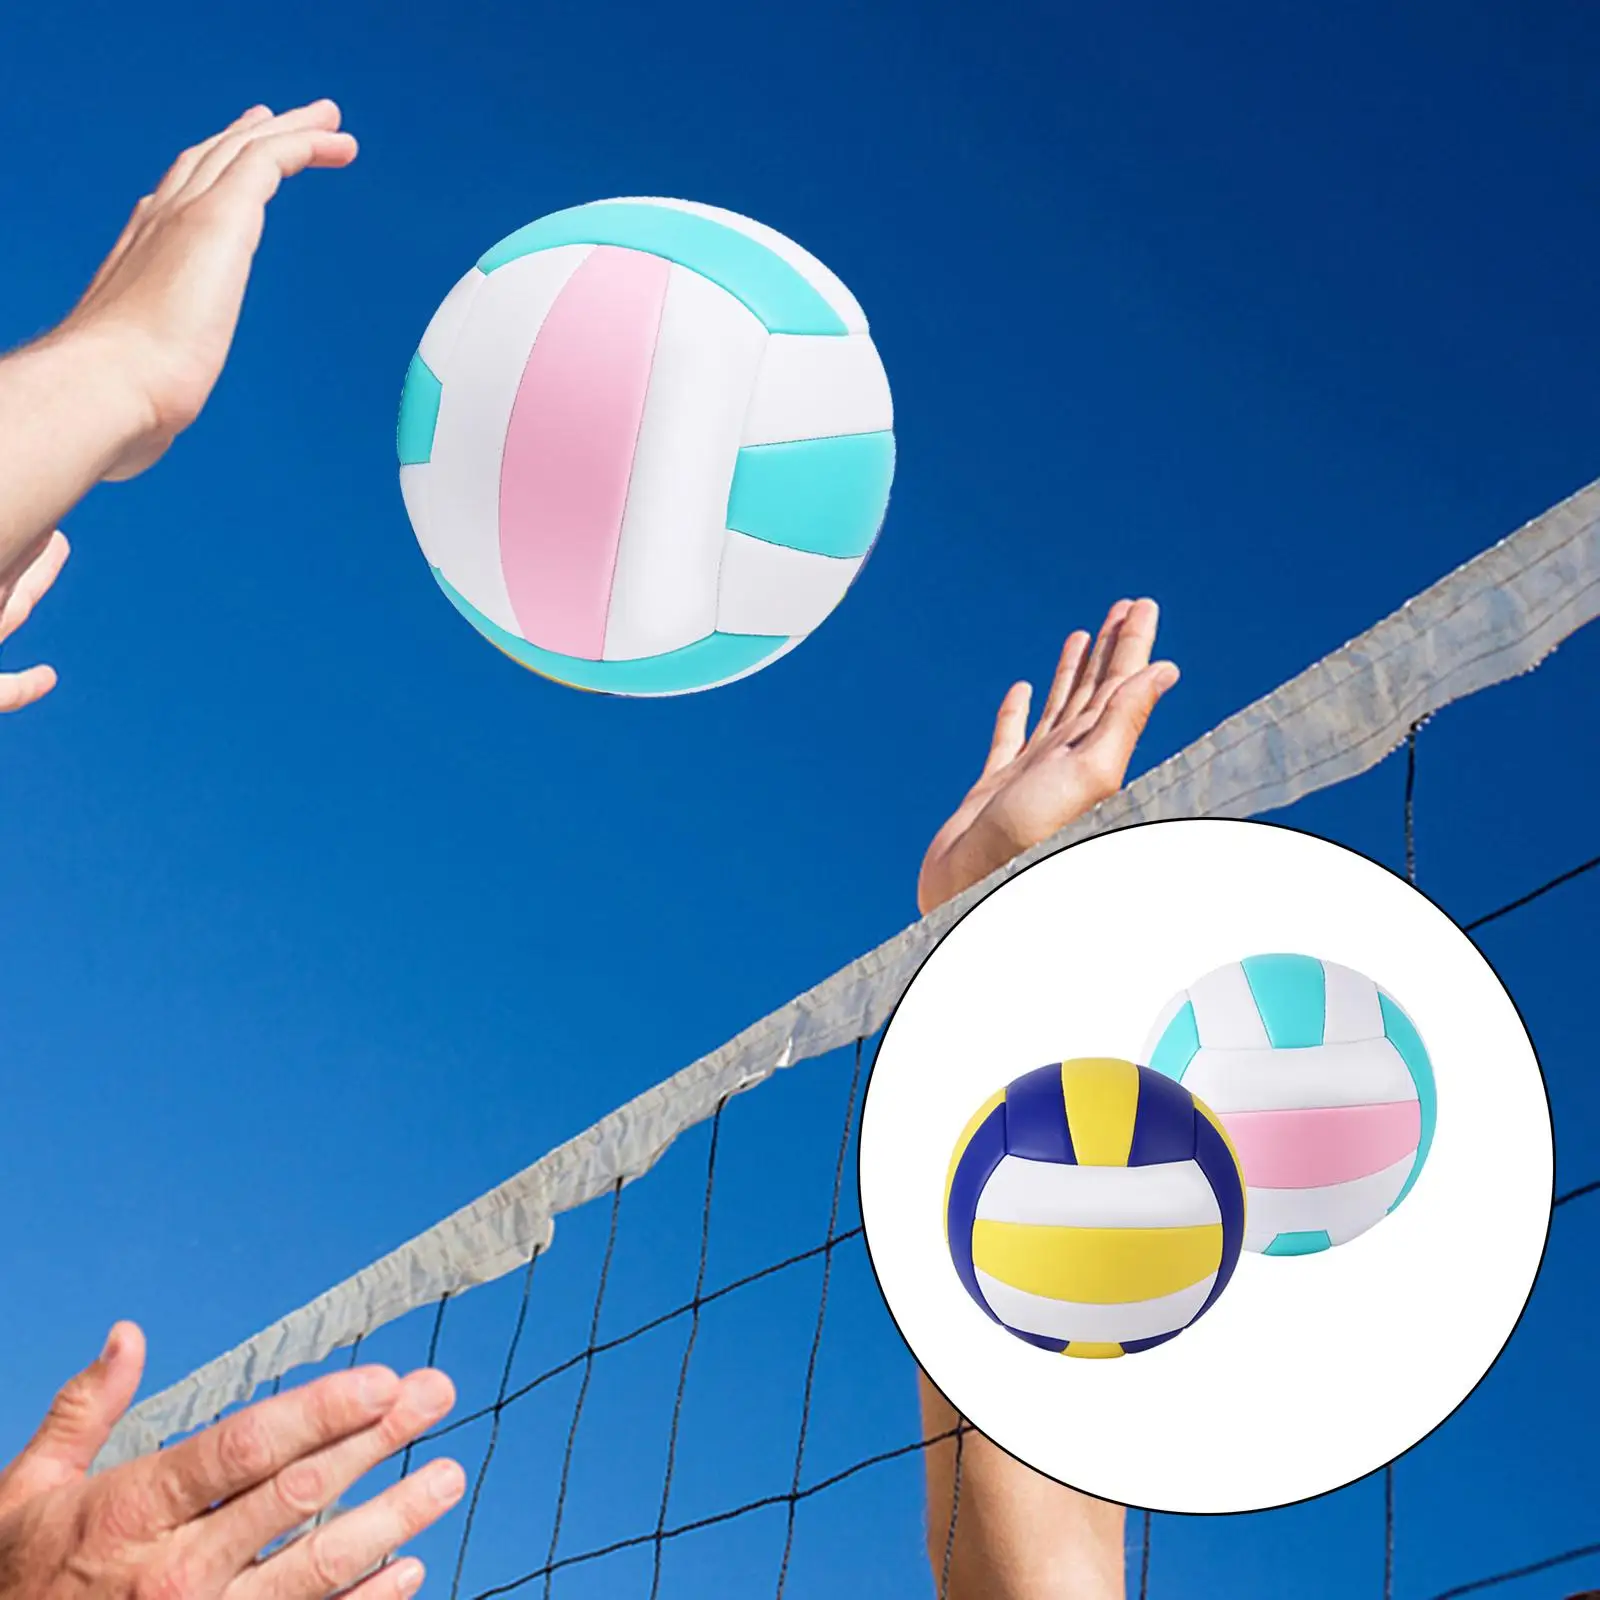 Professional Official Size 5 Indoor Volleyball Soft PU Leather Outdoor Recreational Ball Game Match for Kids Teenager